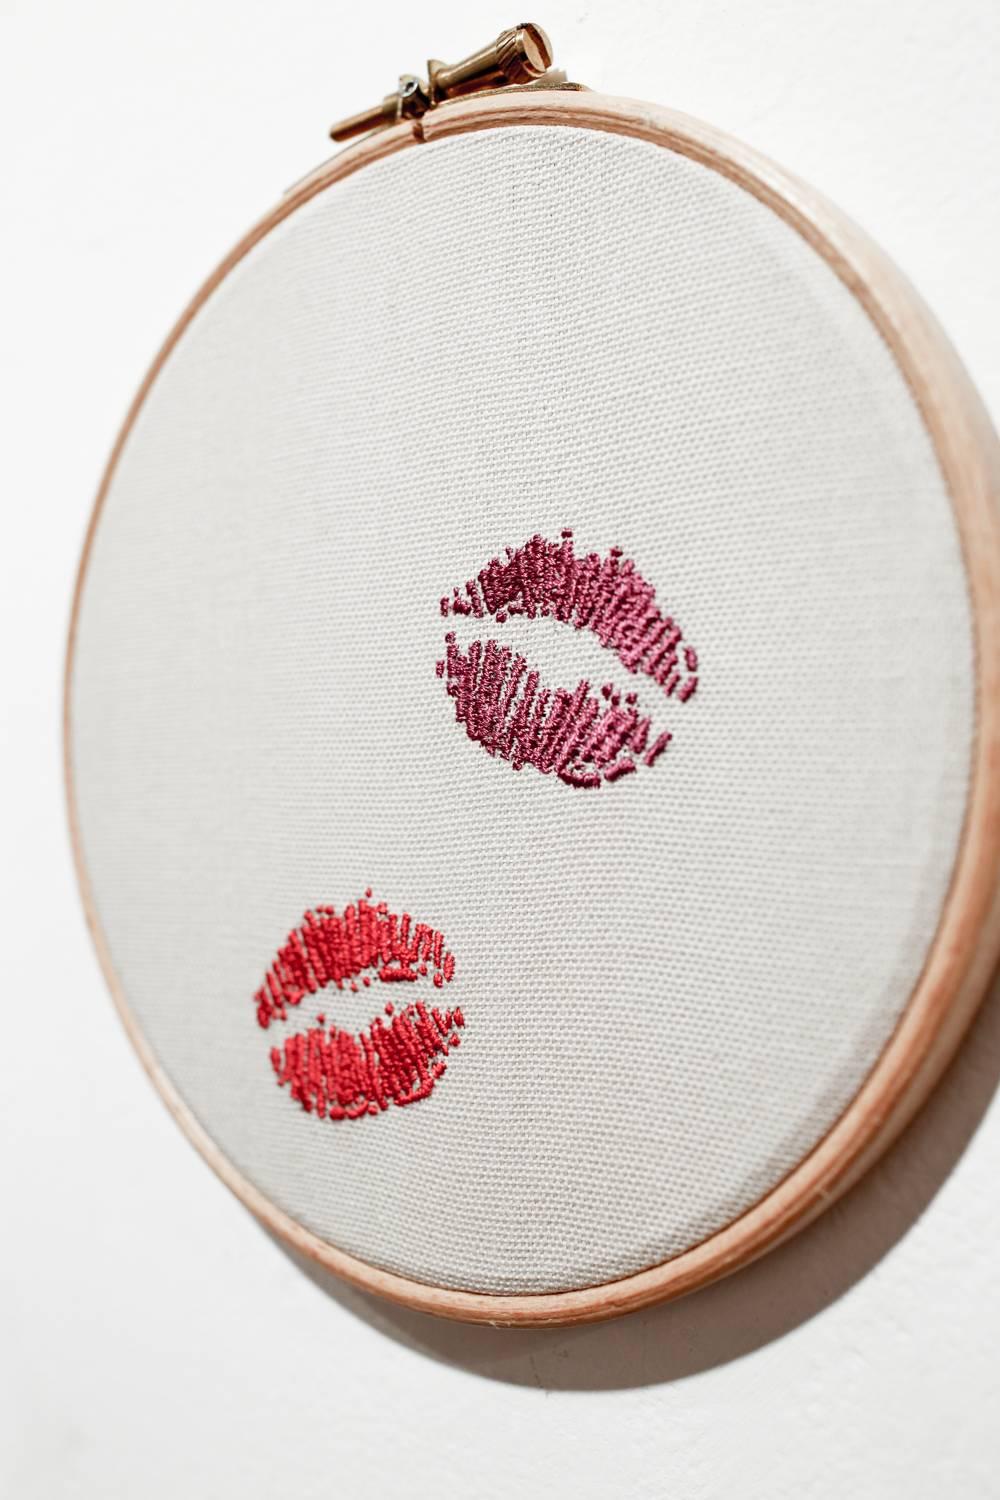 Lipstick Traces I - Contemporary Art by Sam P. Gibson